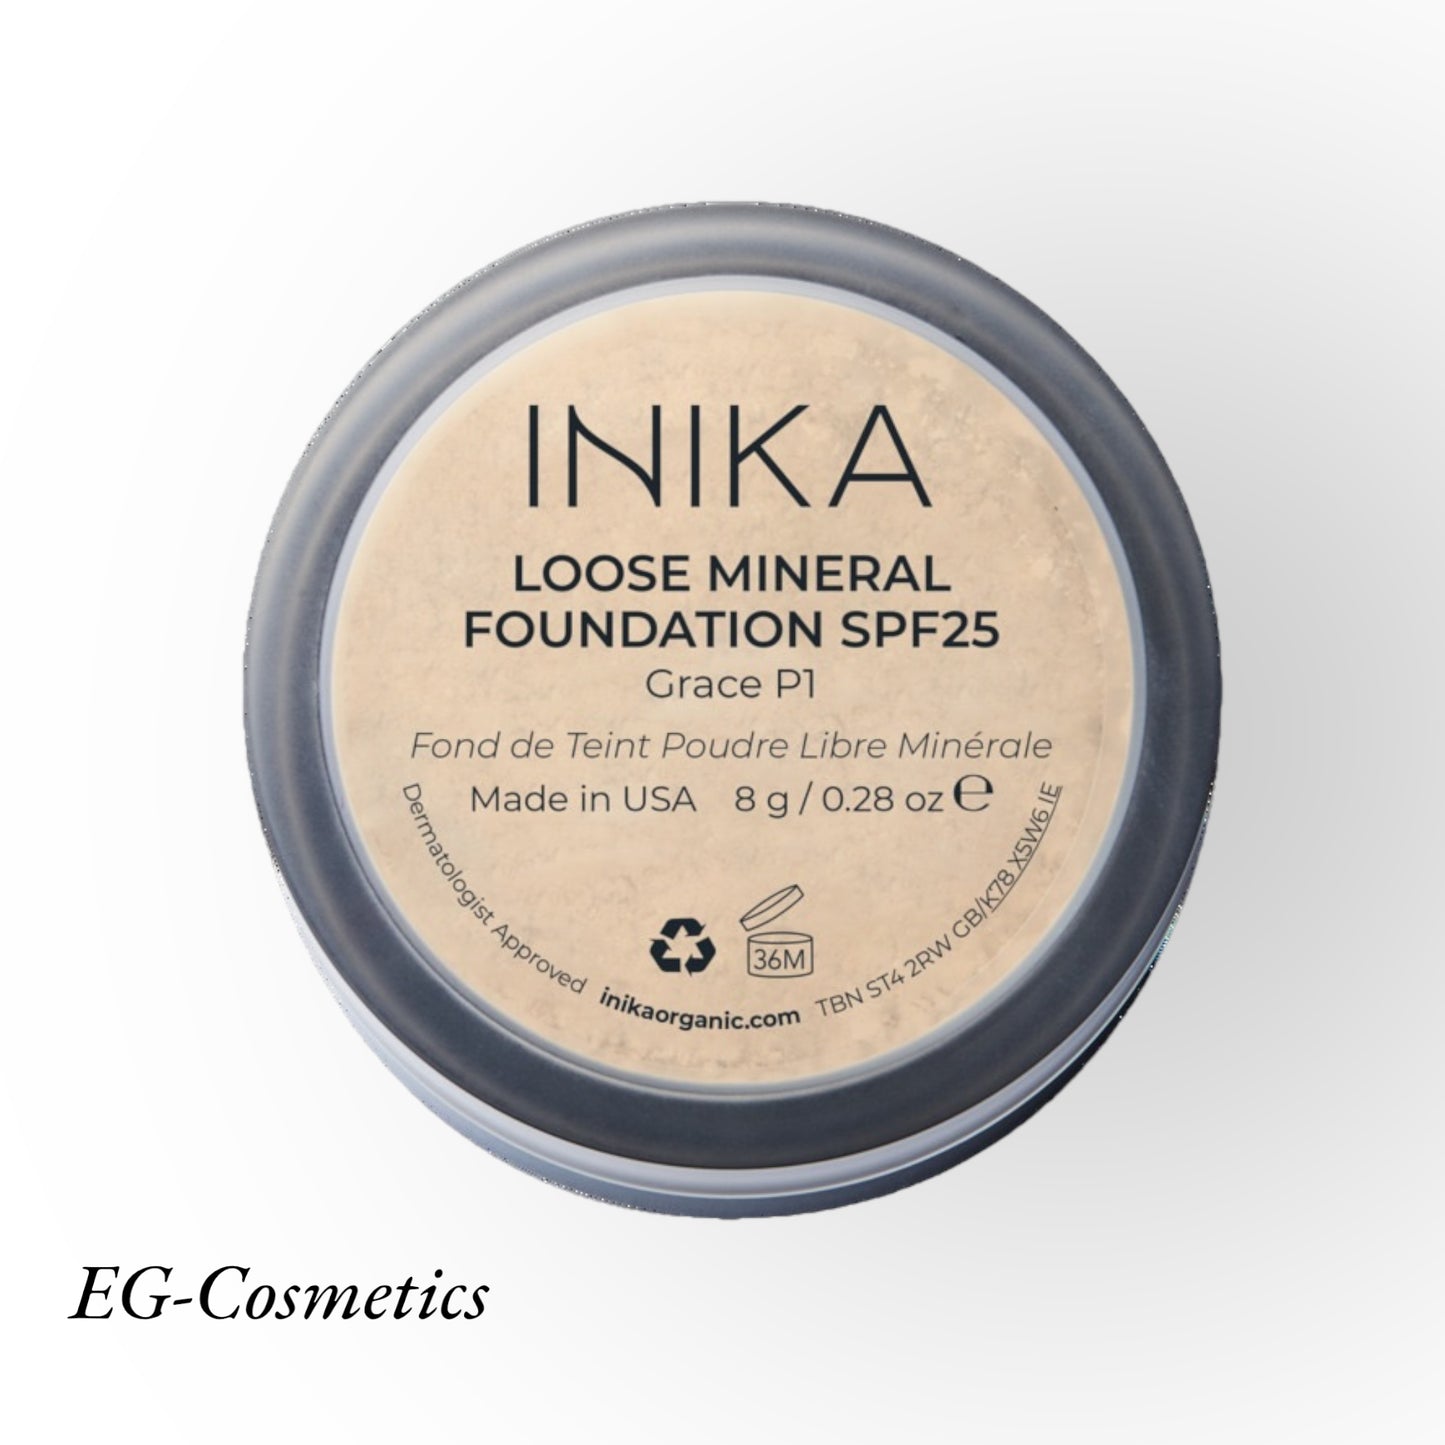 INIKA Certified Loose Mineral Foundation SPF25 8g GRACE